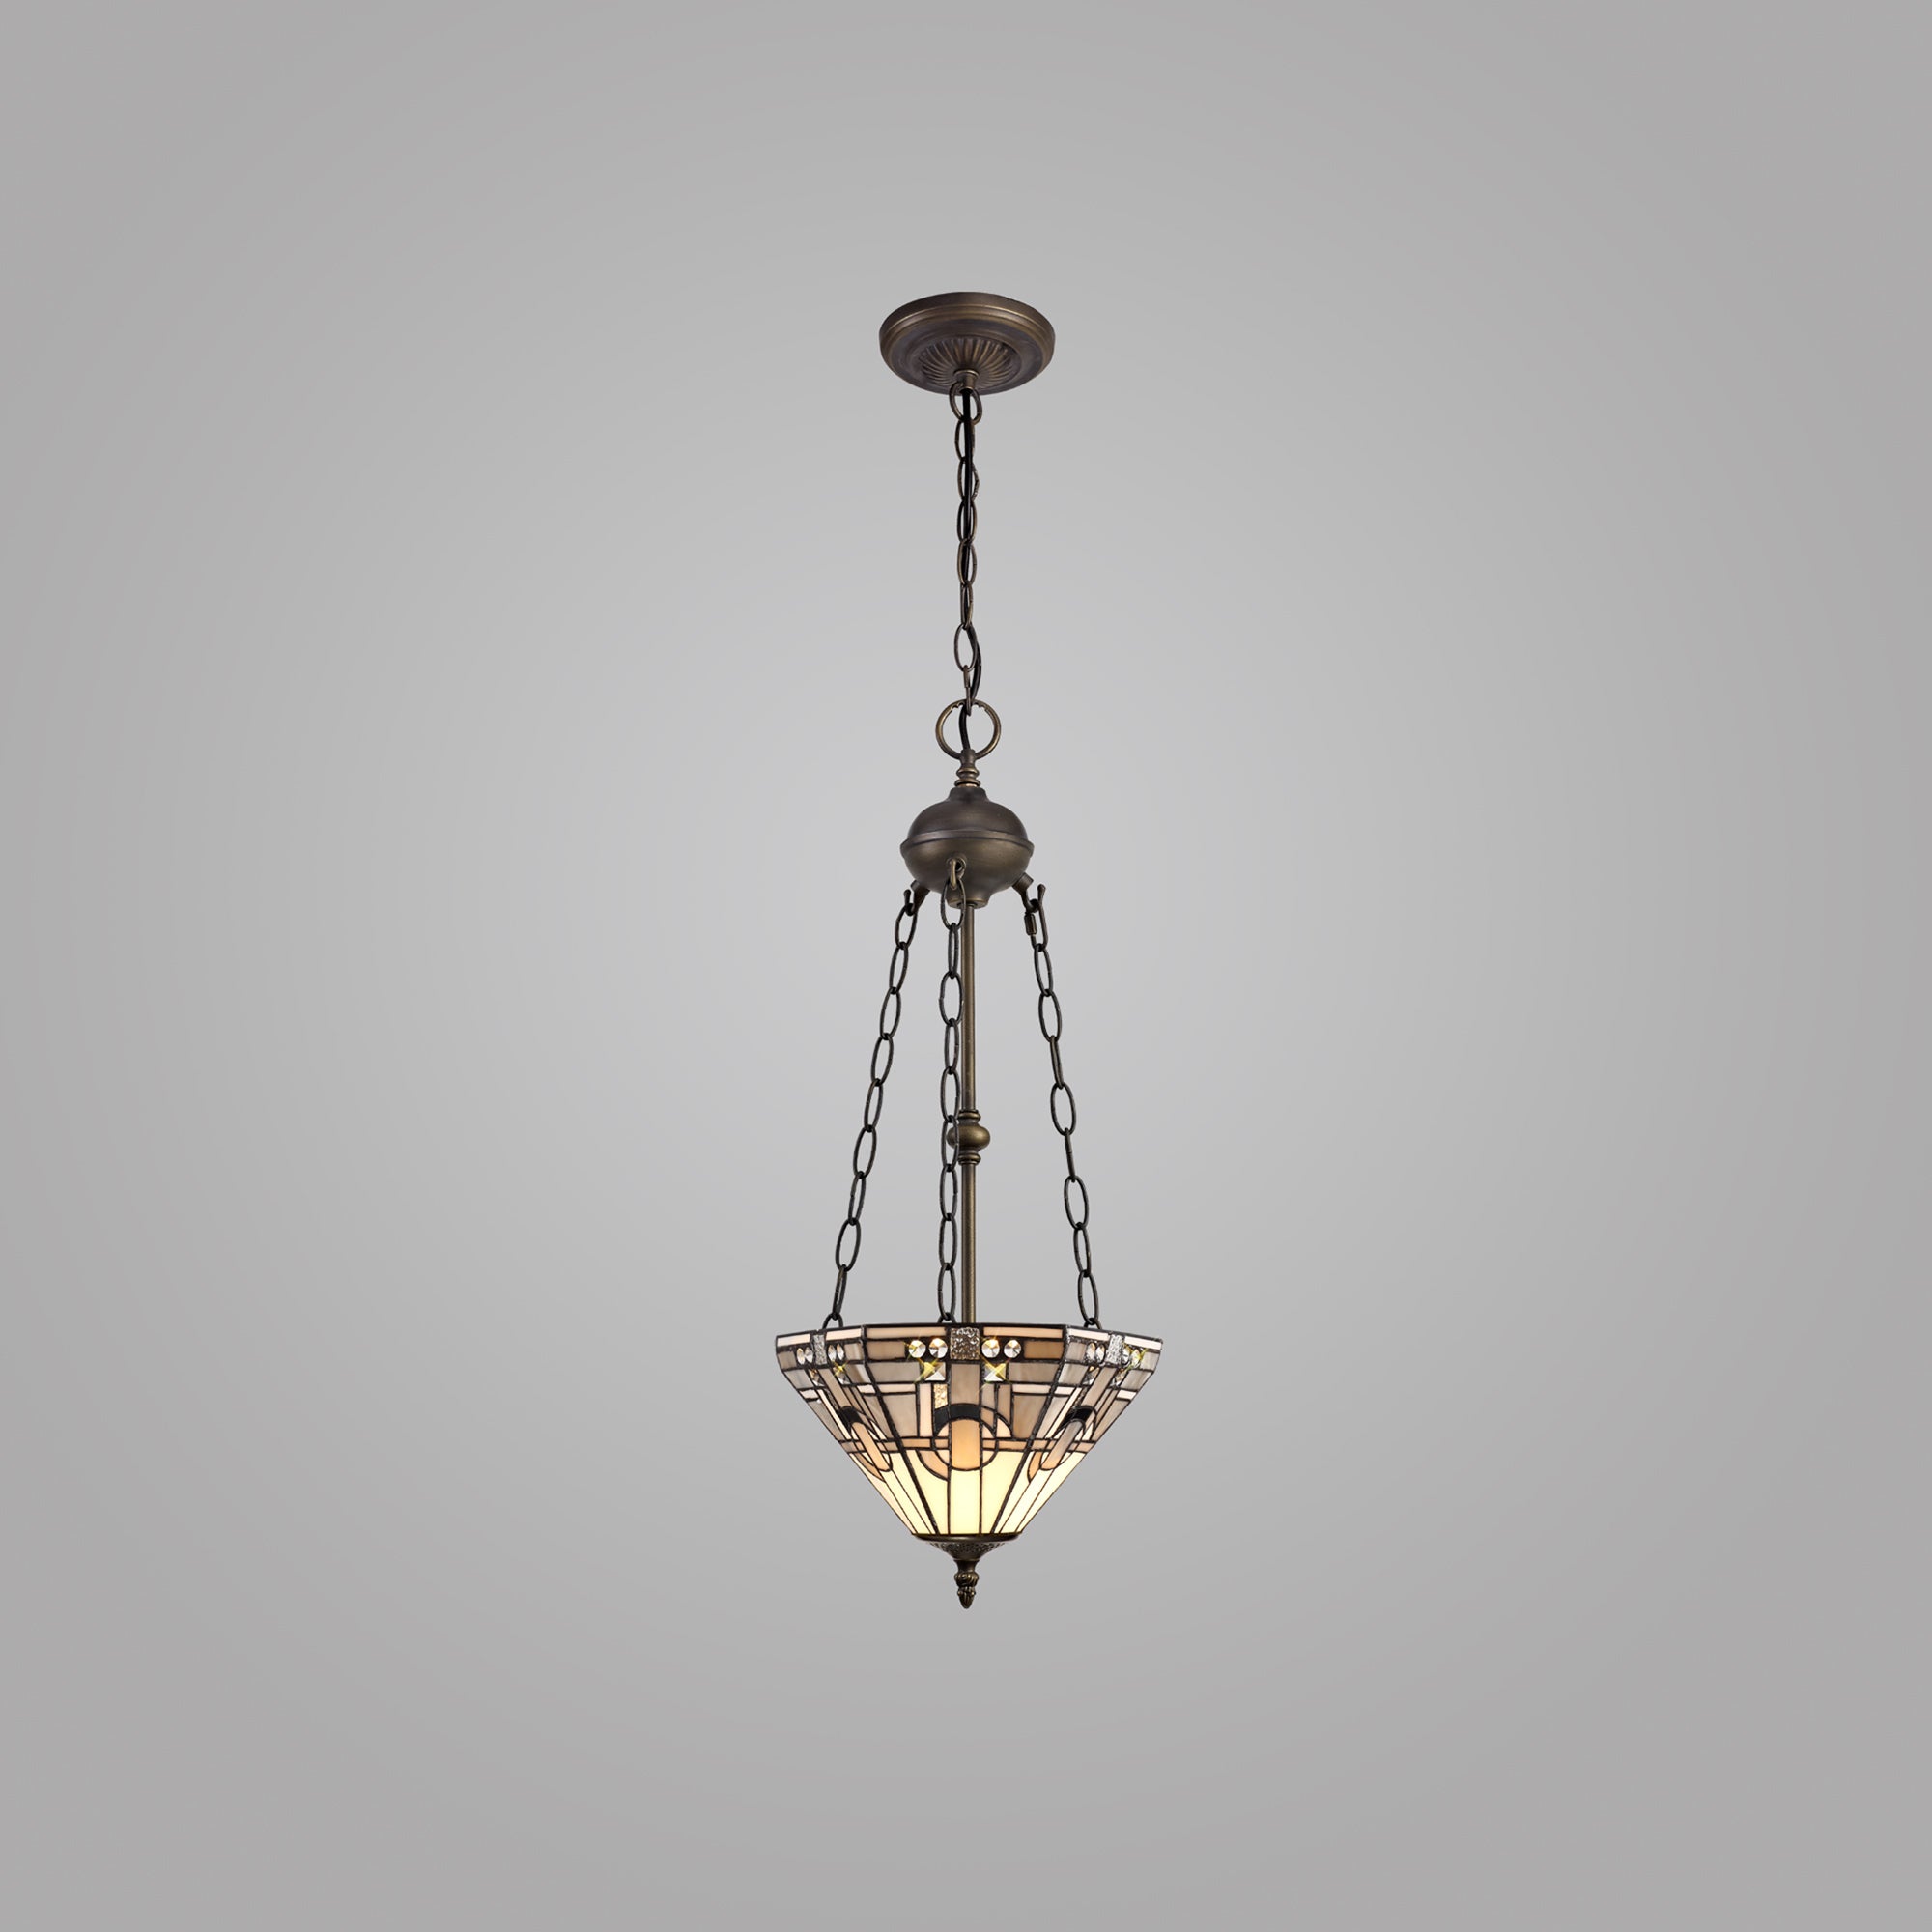 Atek 2 Light Uplighter Pendant E27 With 30cm Tiffany Shade, White/Grey/Black/Clear Crystal/Aged Antique Brass